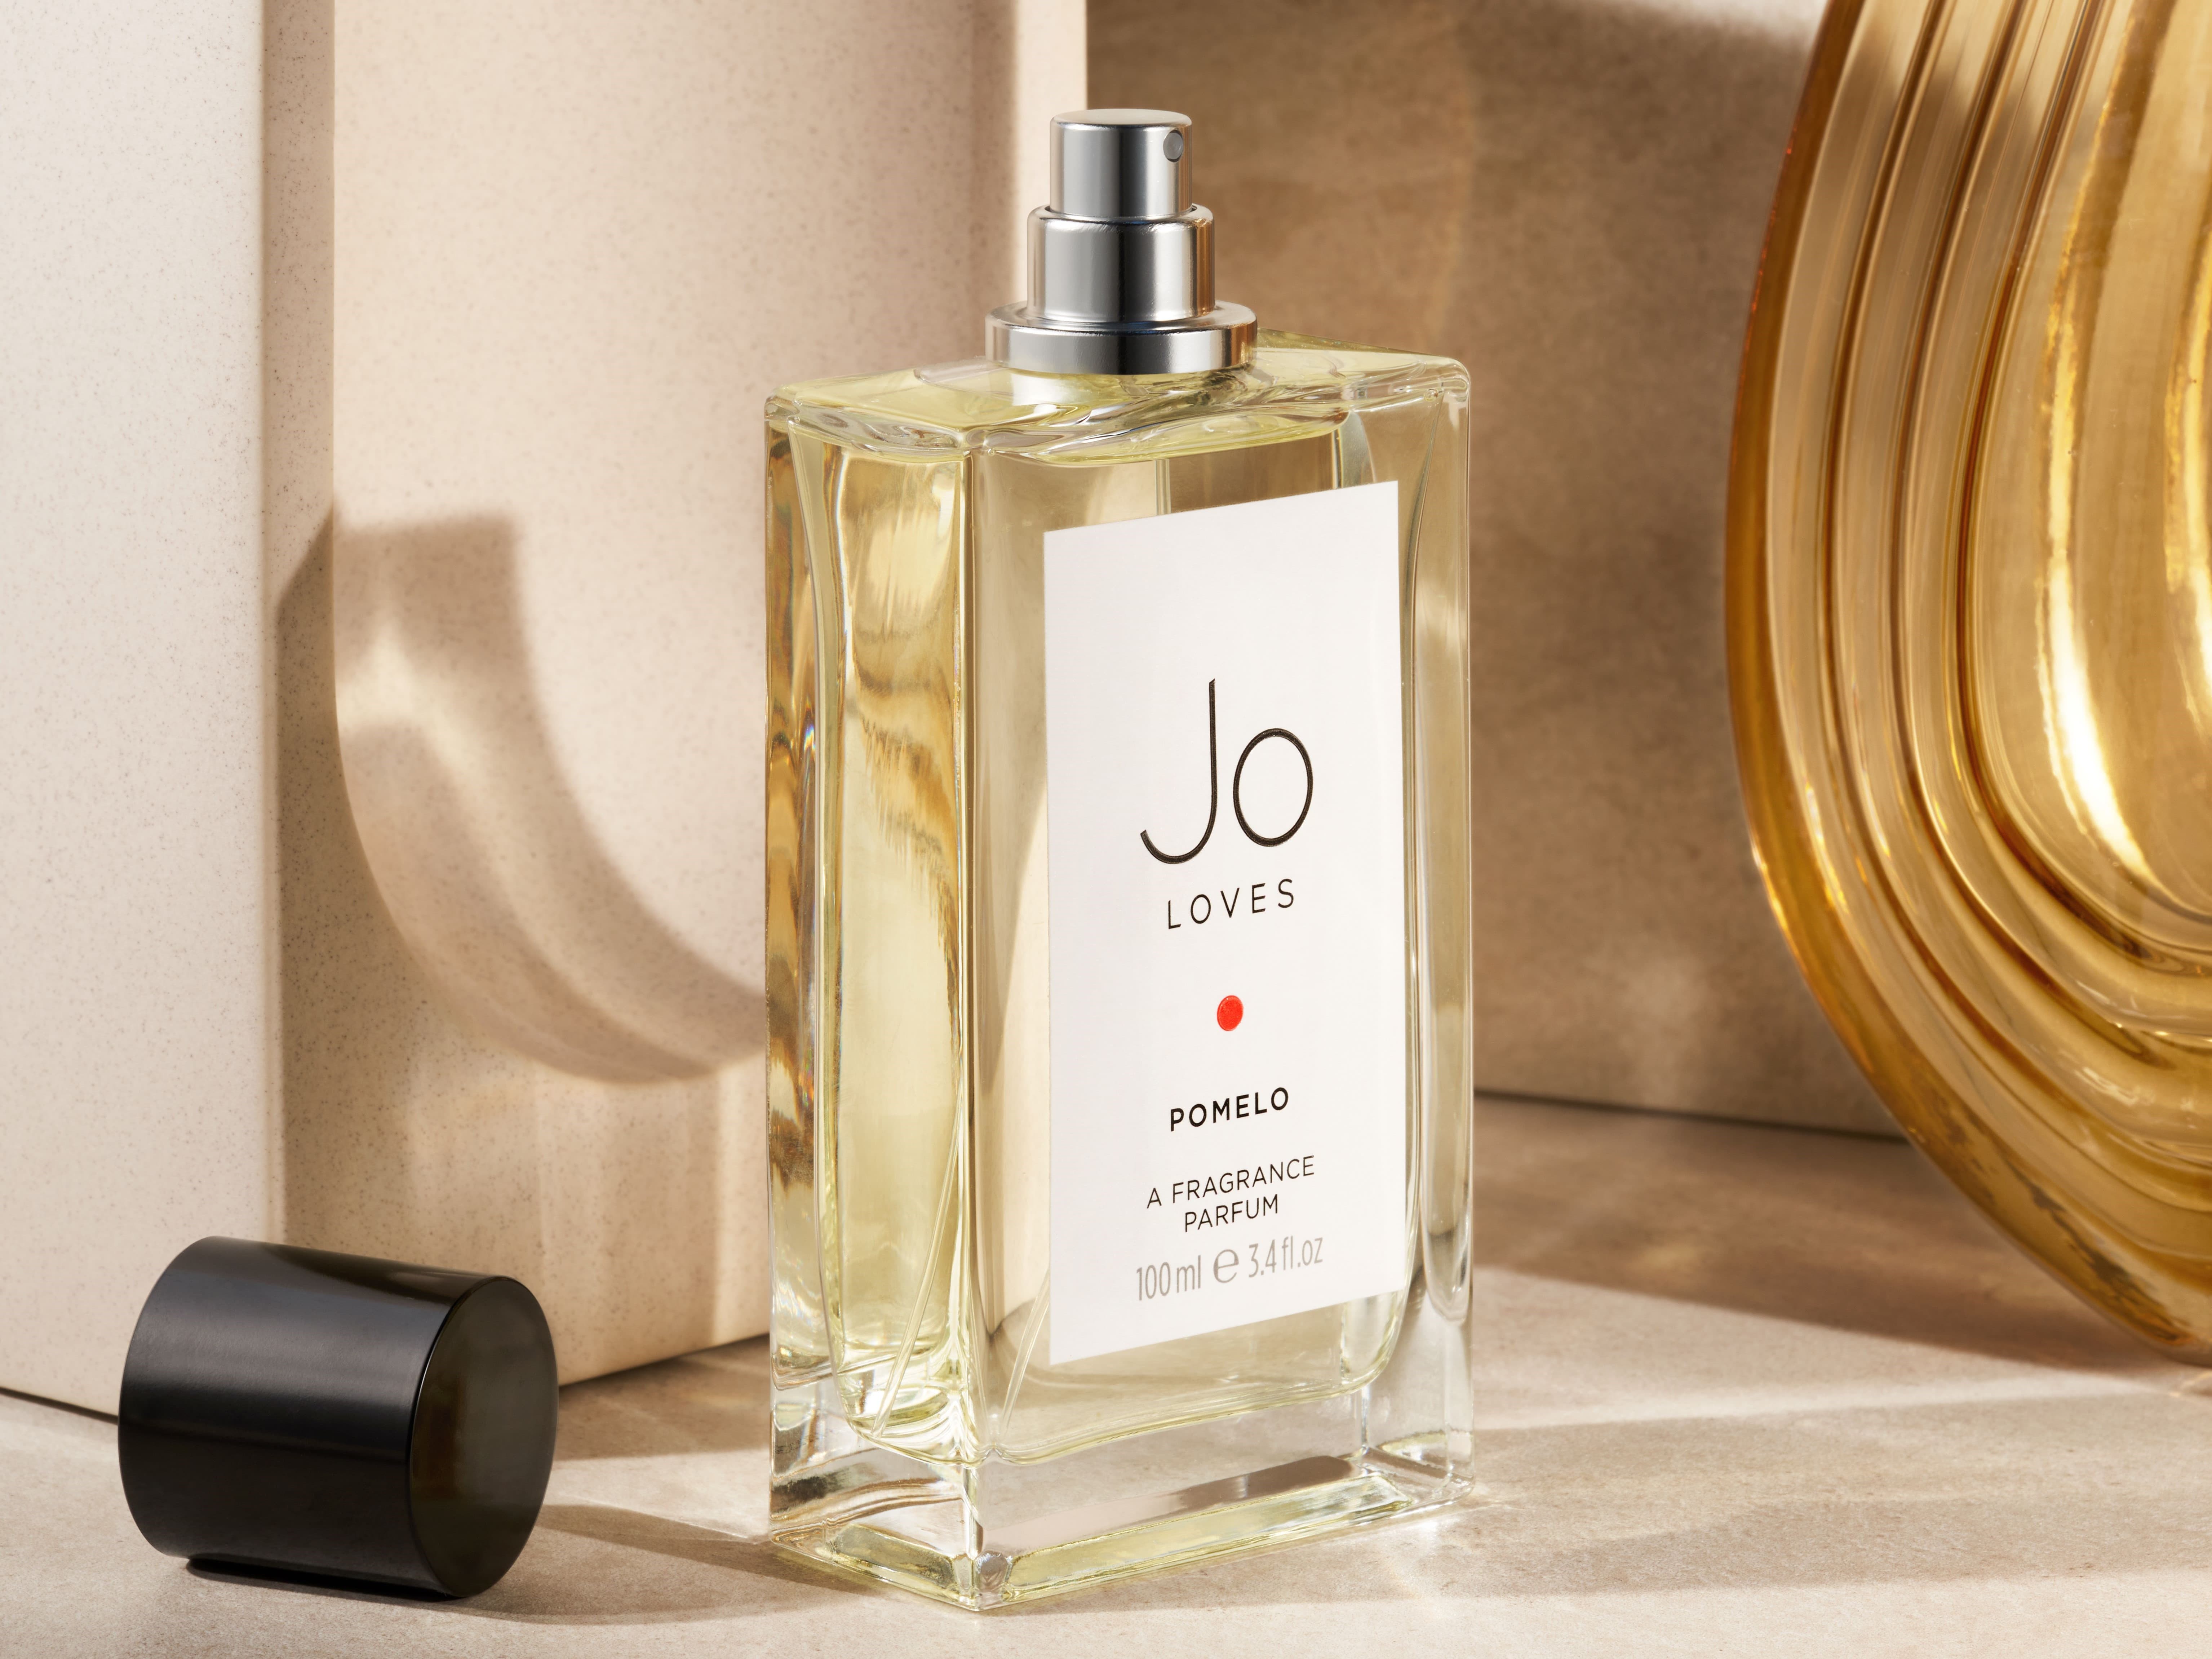 Top 5 Jo Loves Fragrances For Creating An Unforgettable Signature Scent